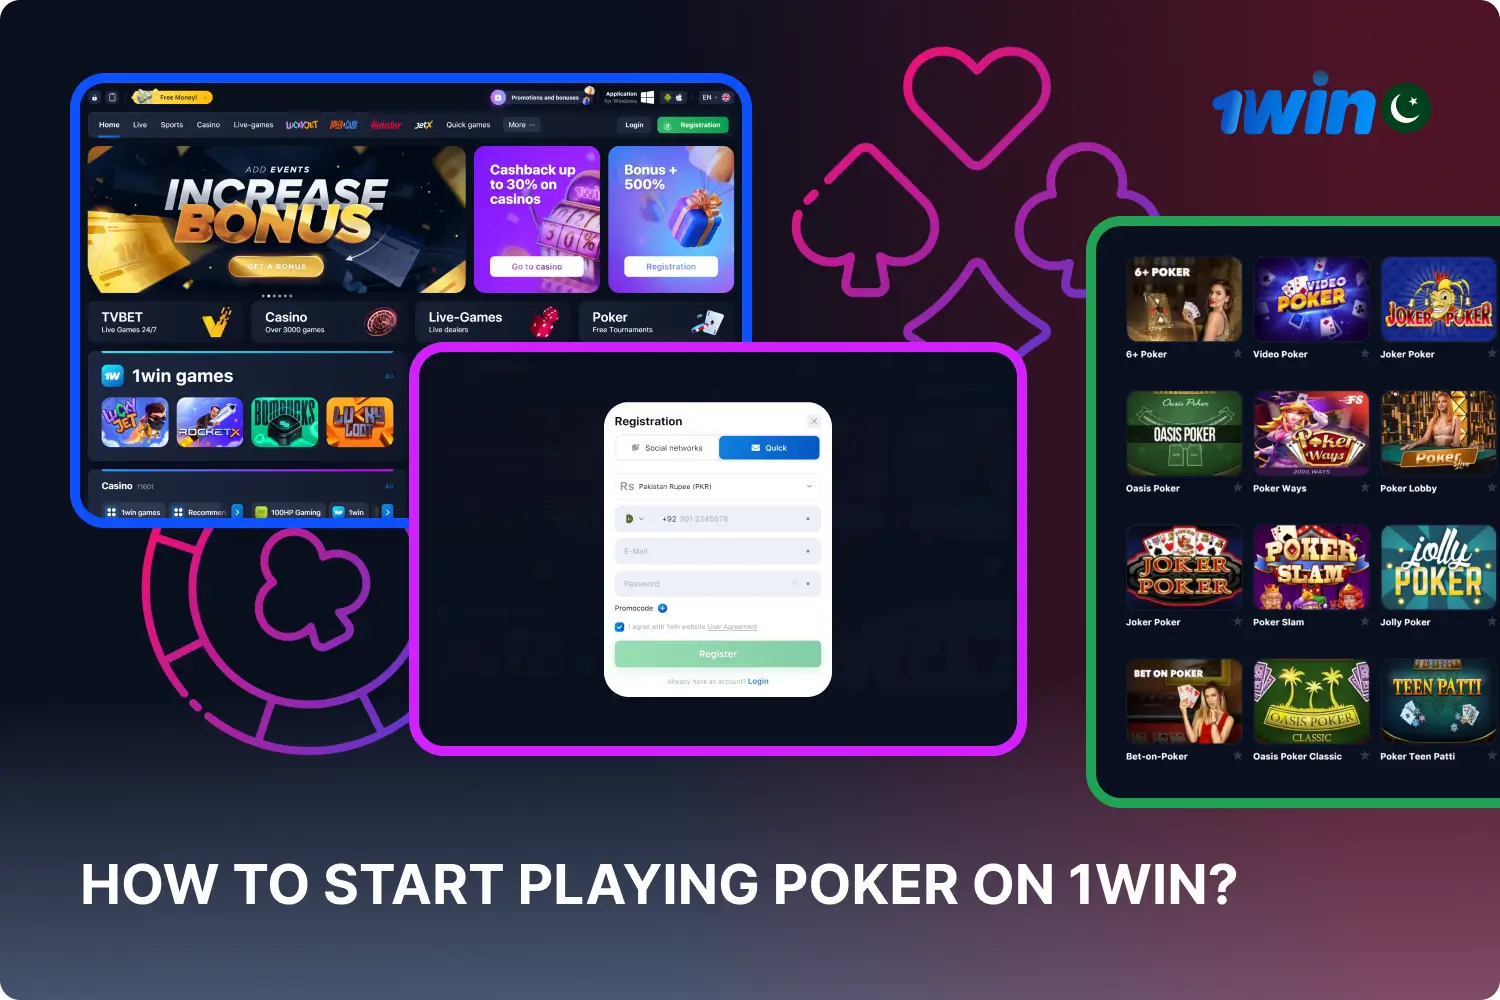 To start playing poker at 1win in Pakistan users need to follow a few simple steps